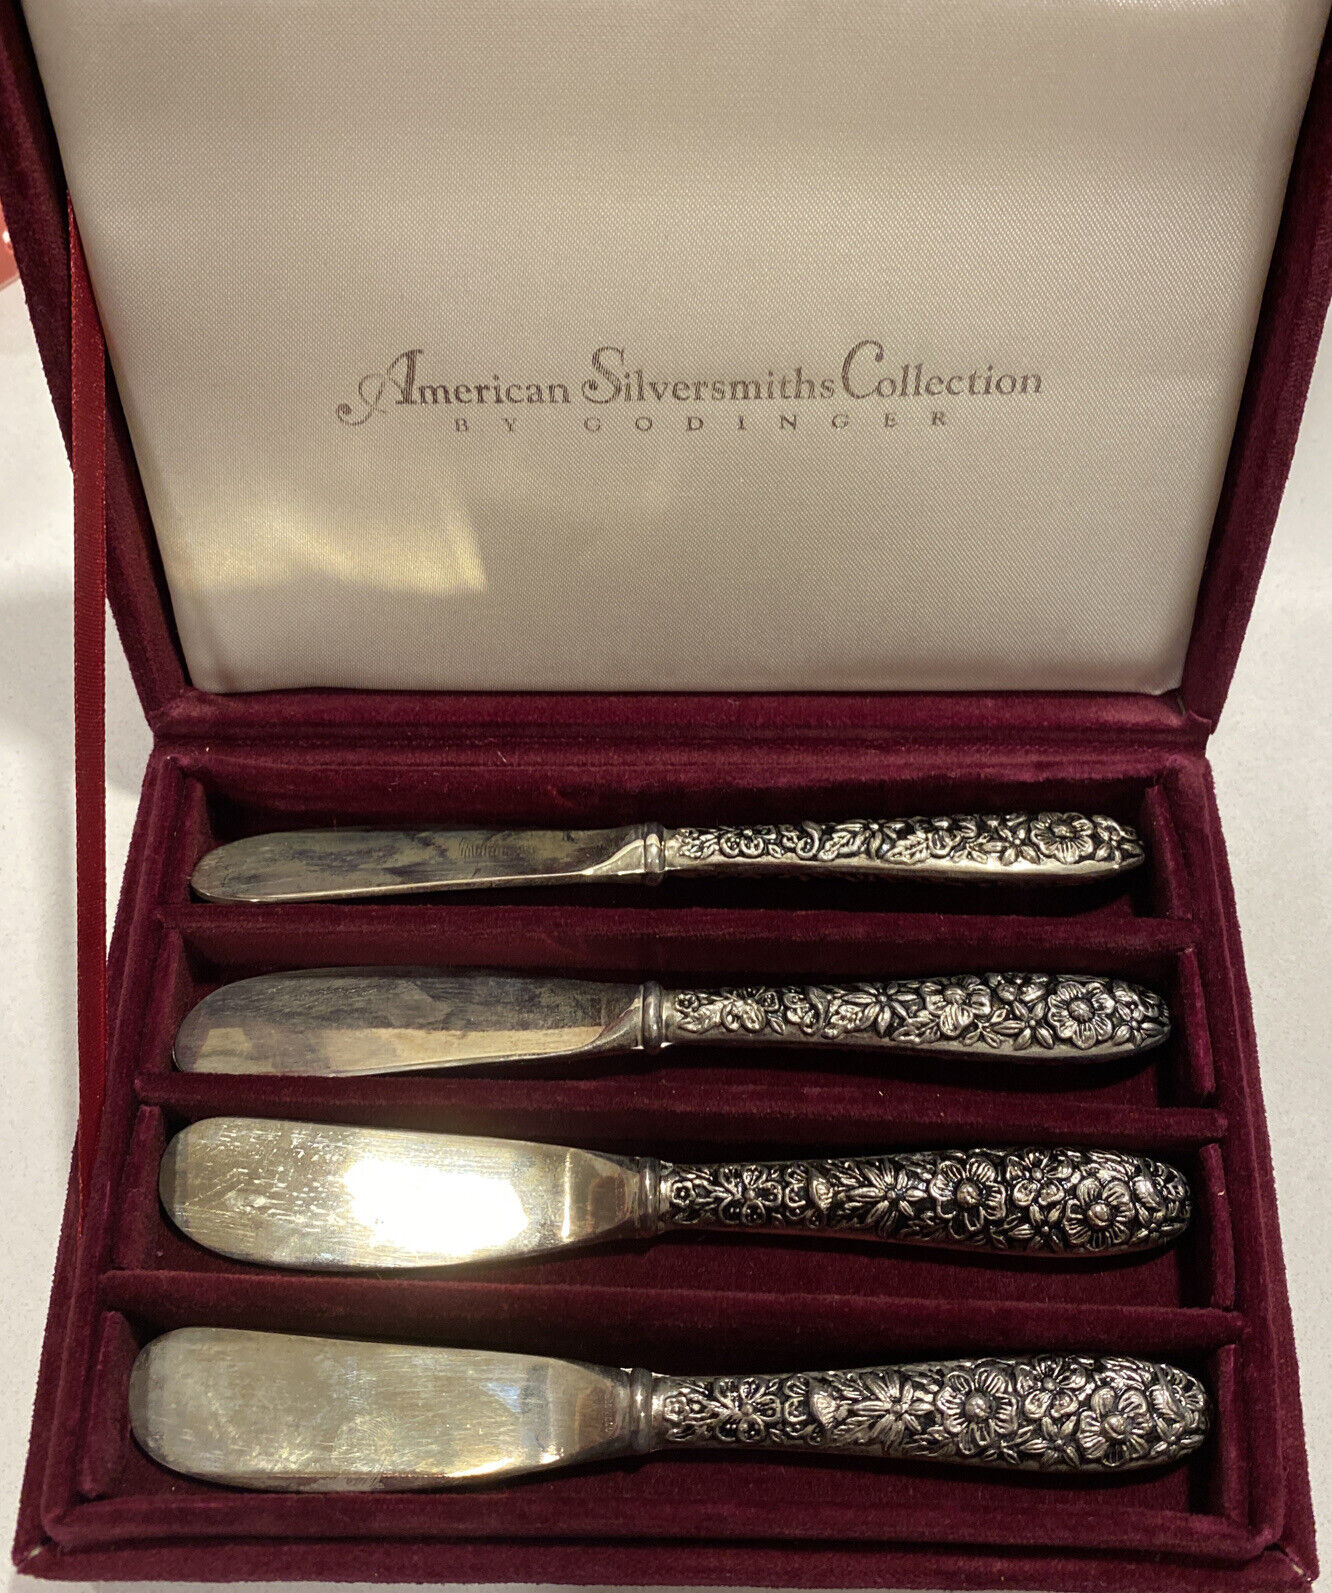 American Silversmiths Collection by Godinger 4pcs Butter Knives Spreader Set